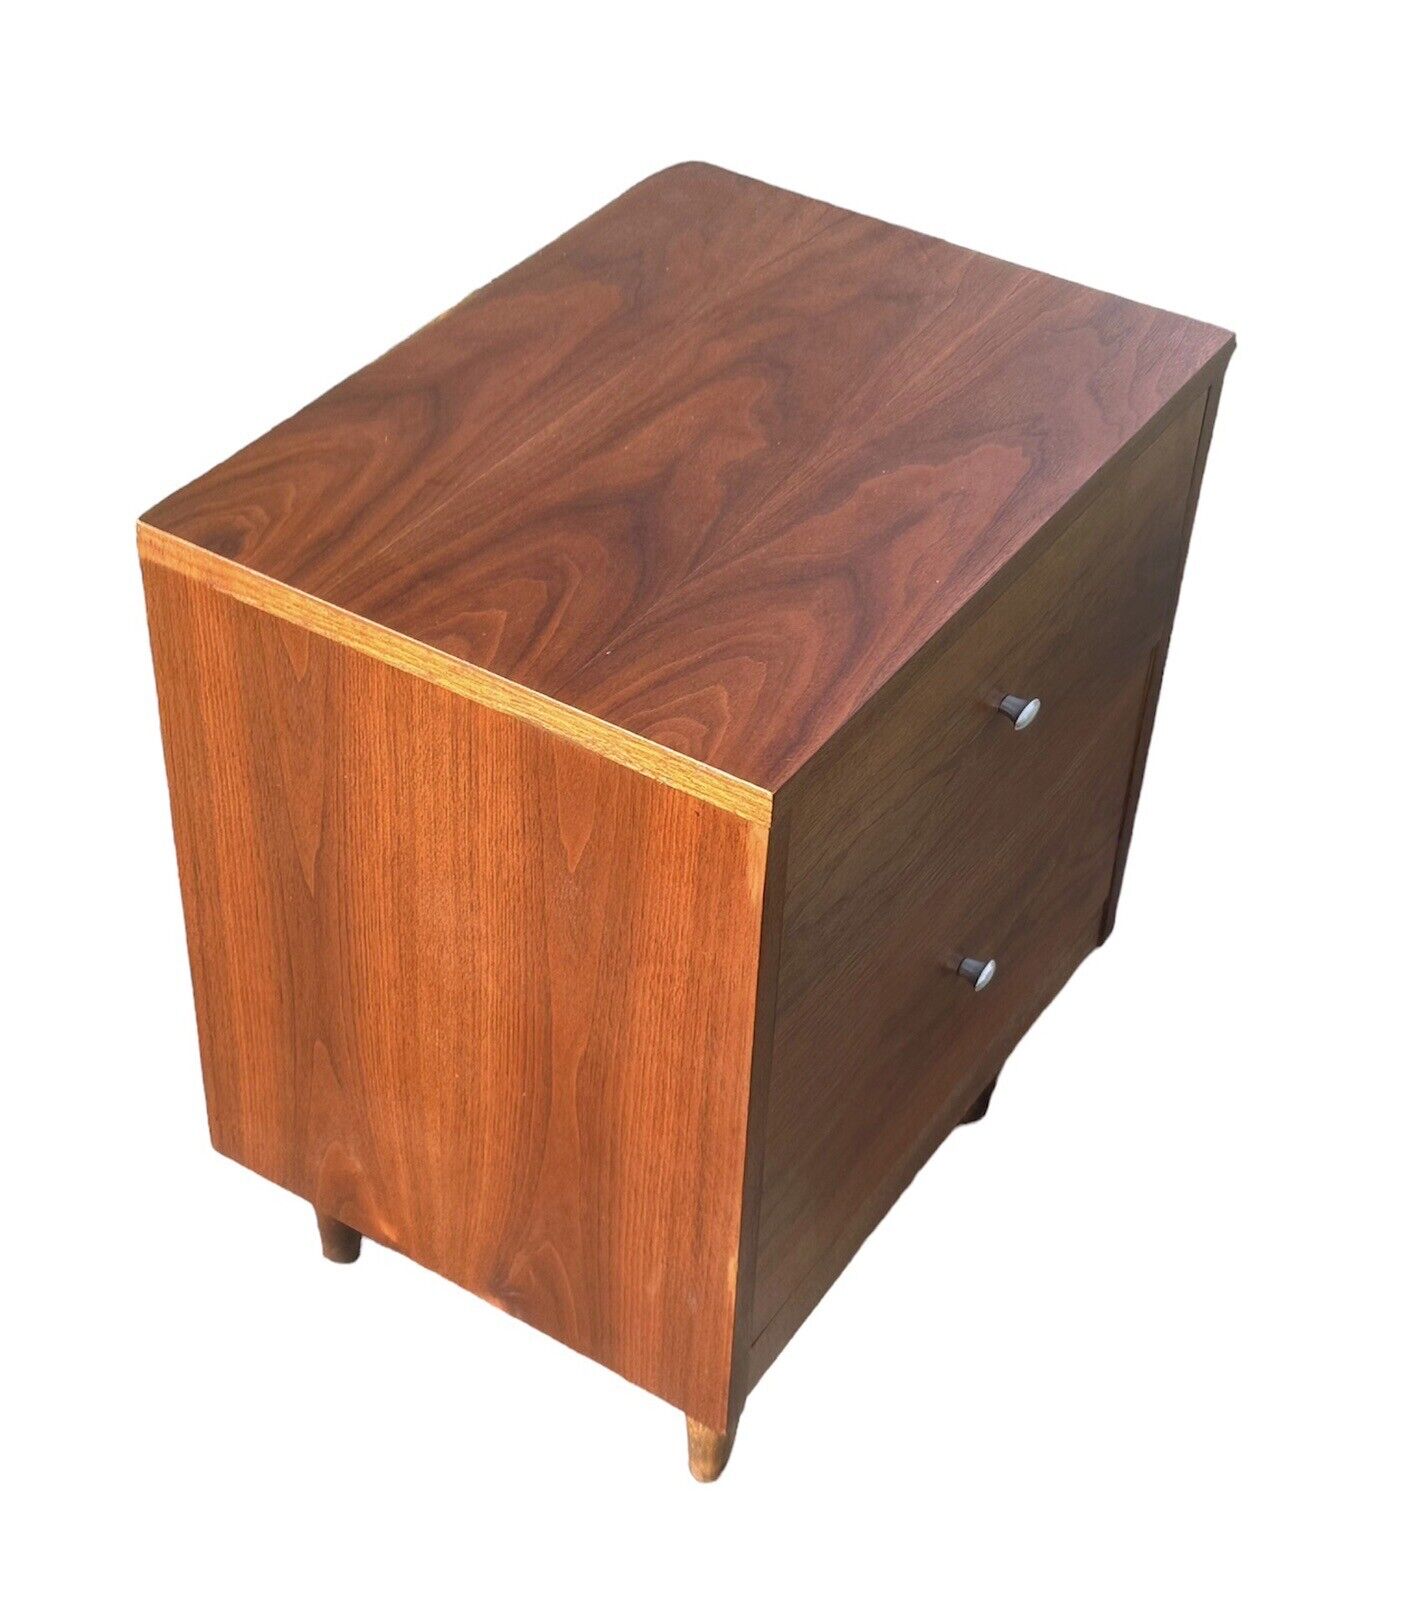 Pair of Mid-century Modern Walnut Two Drawer Nightstands by Crescent Furniture